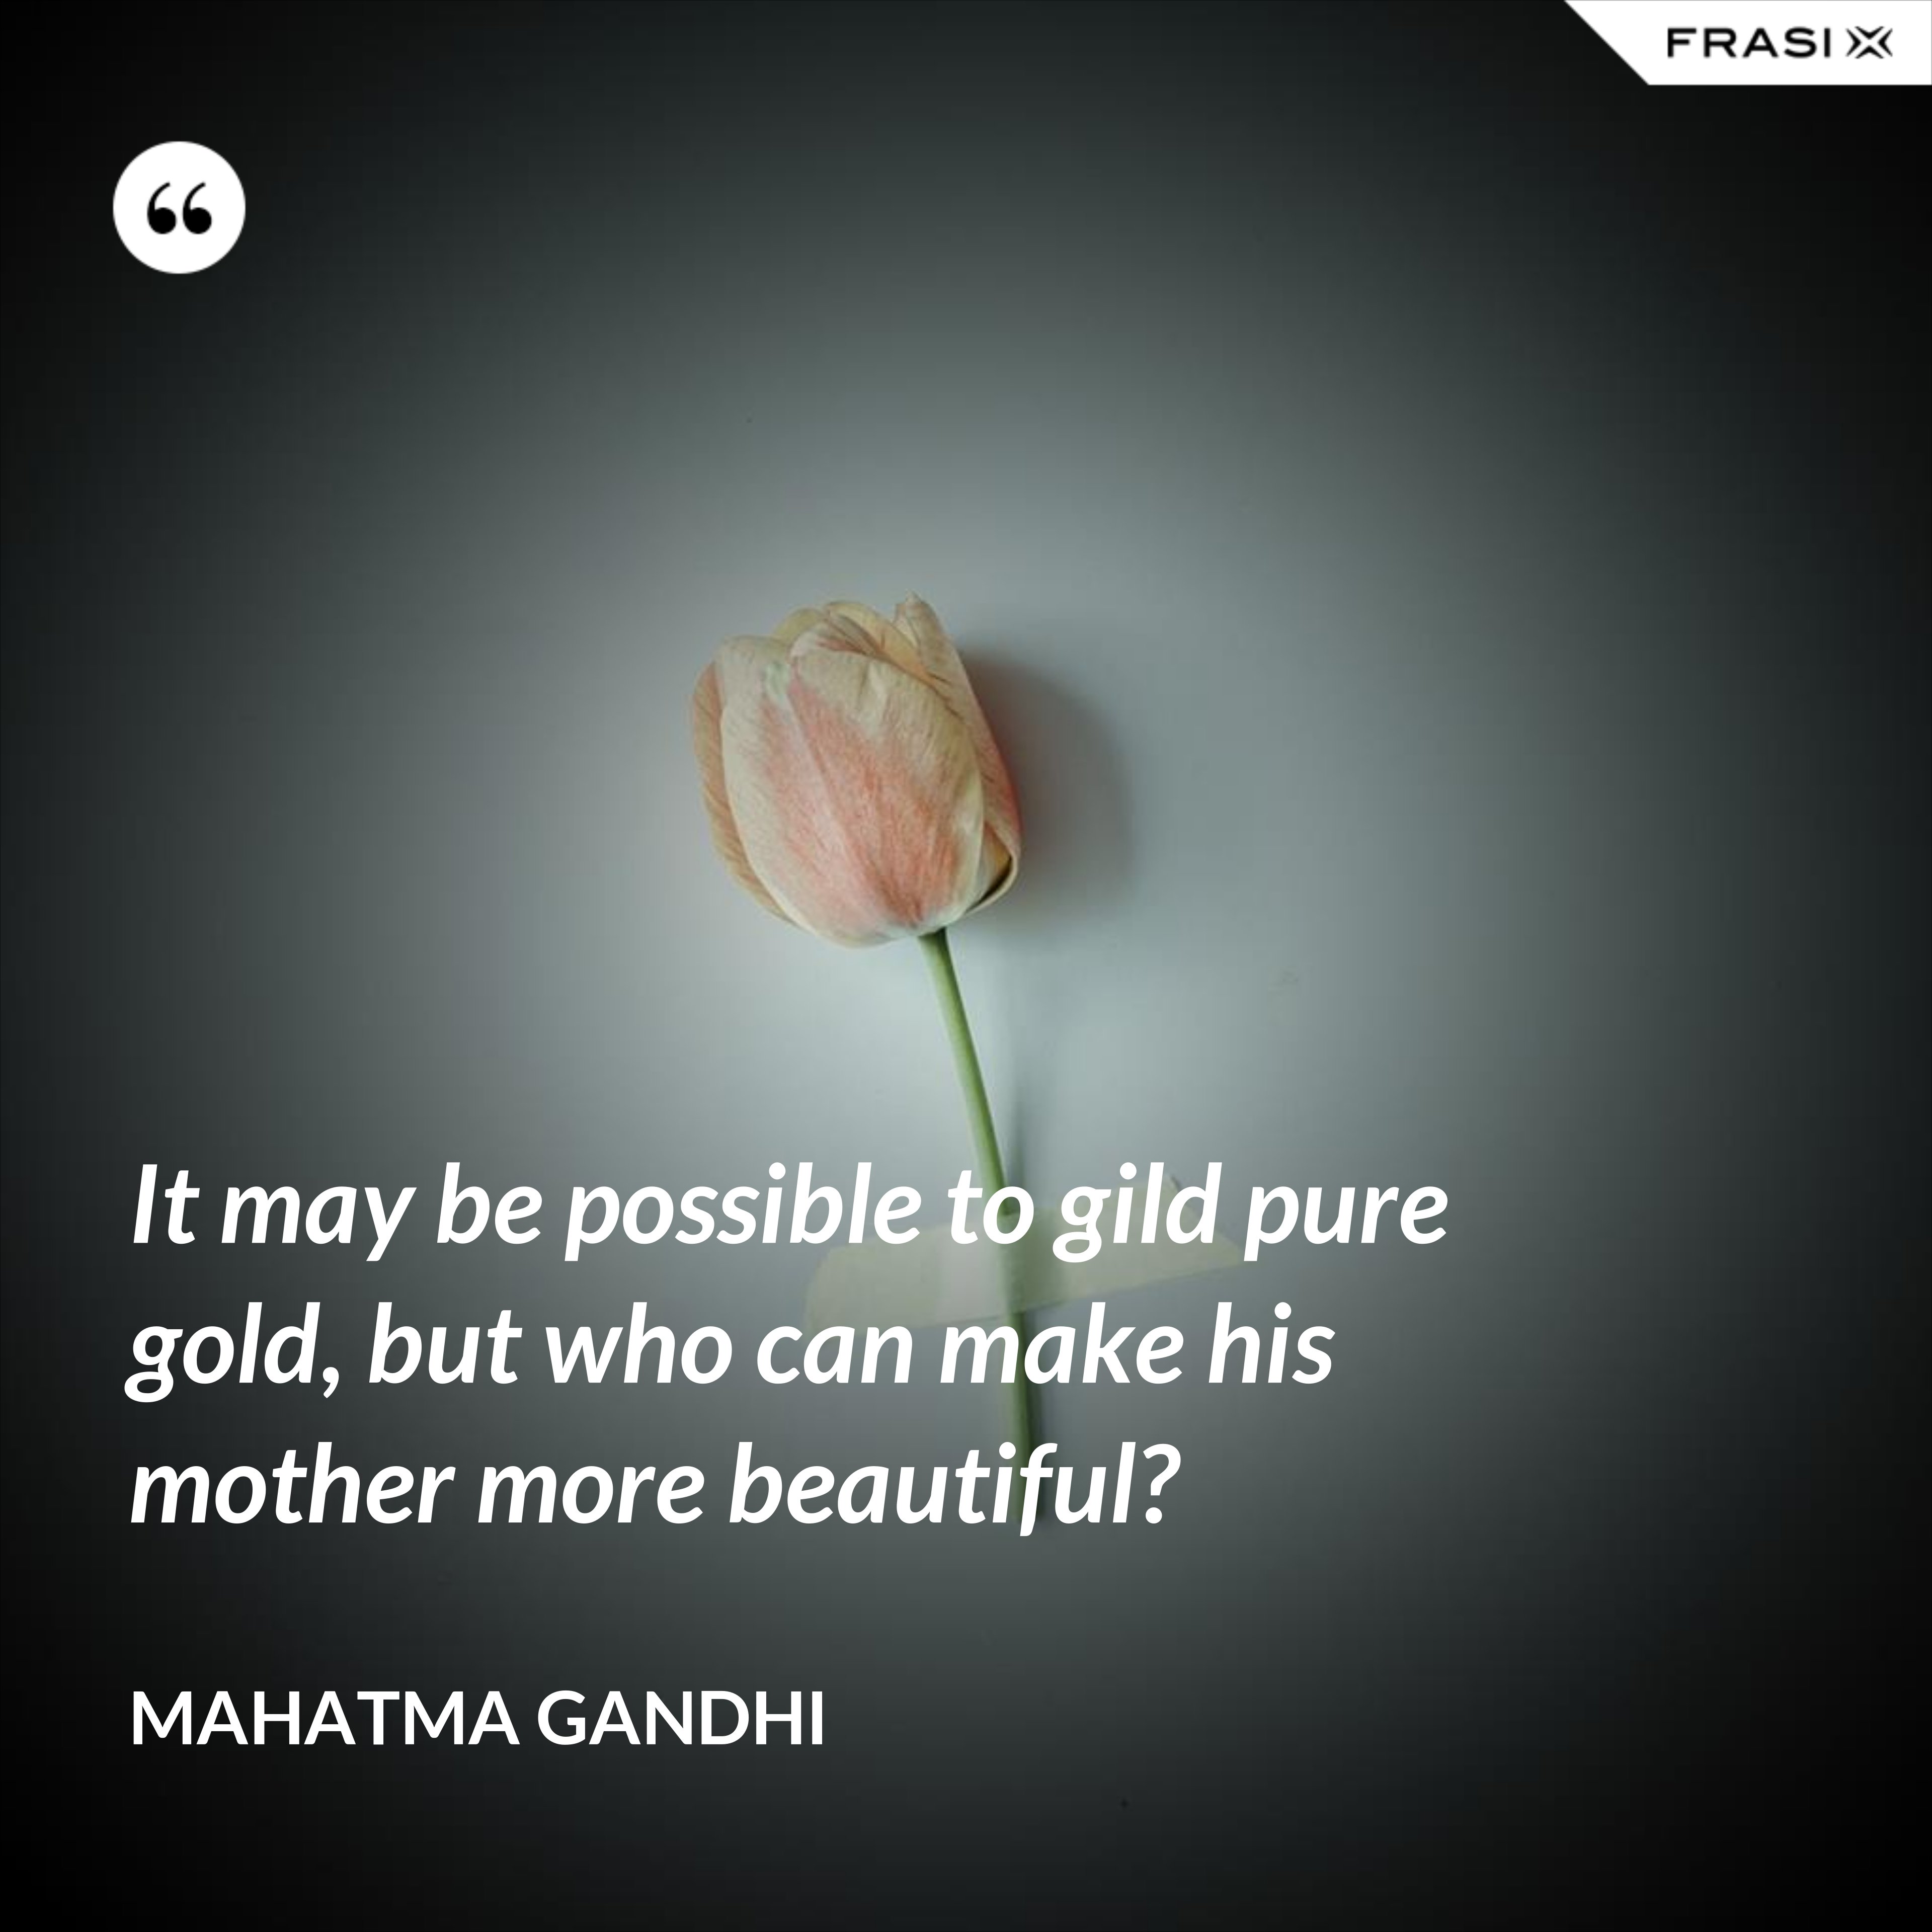 It may be possible to gild pure gold, but who can make his mother more beautiful? - Mahatma Gandhi